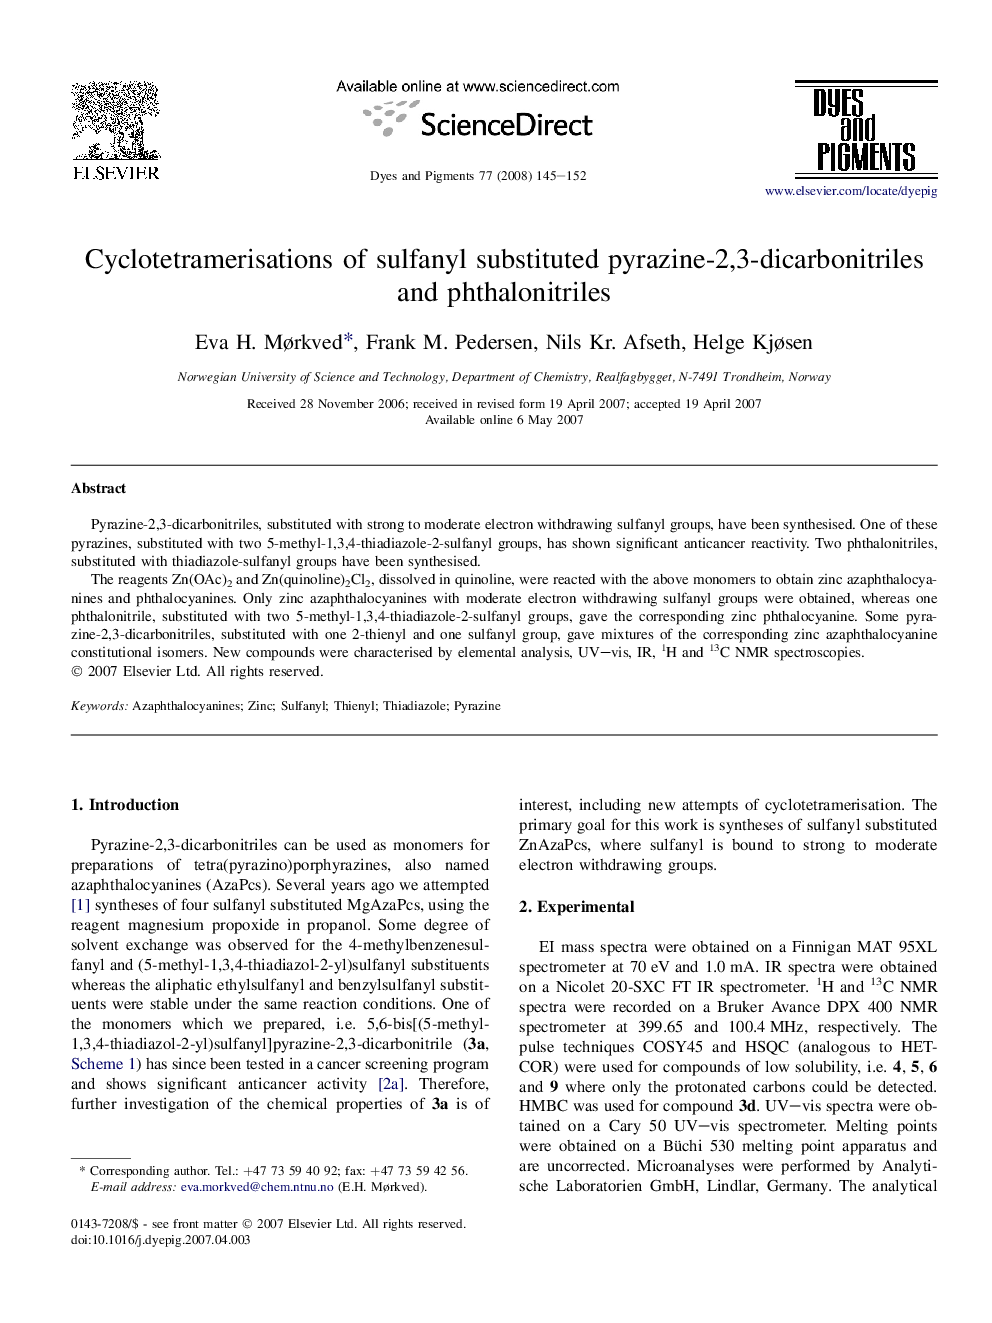 Cyclotetramerisations of sulfanyl substituted pyrazine-2,3-dicarbonitriles and phthalonitriles